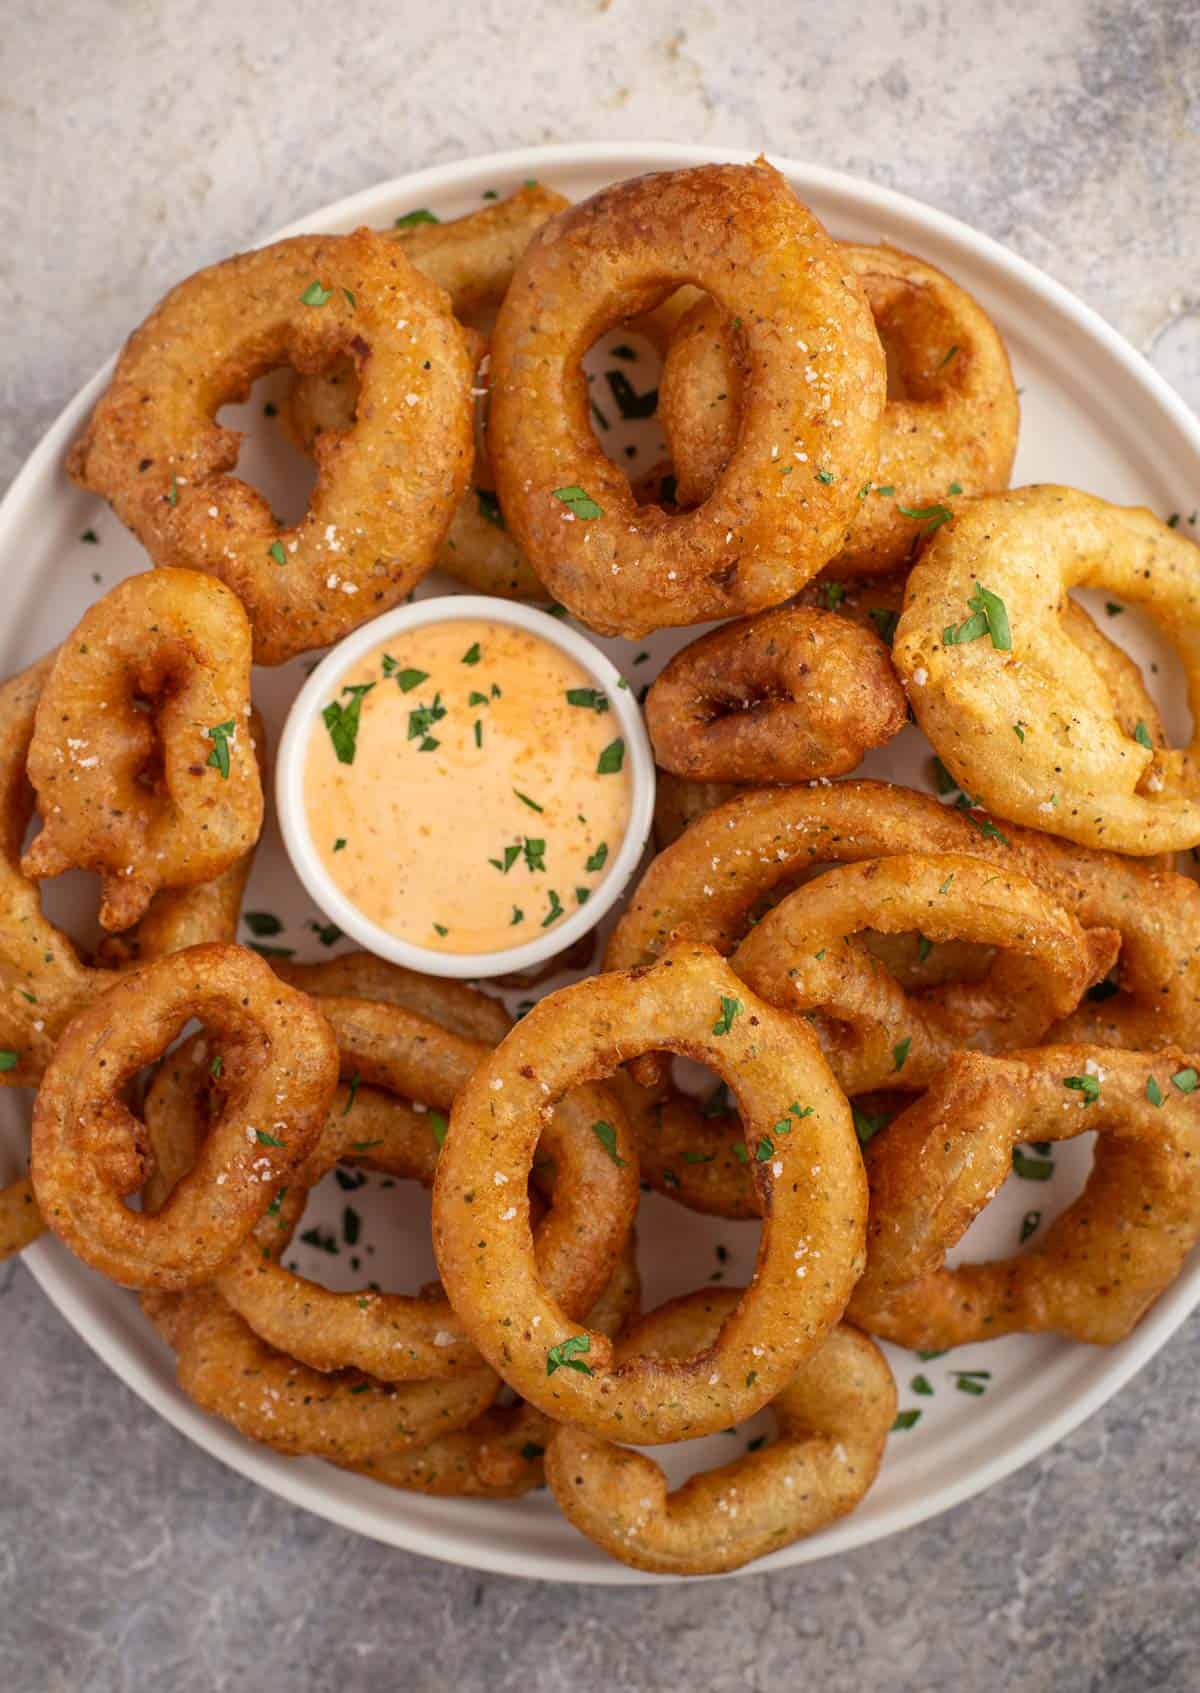 A platter full of smoked onion rings with a chipotle dipping sauce